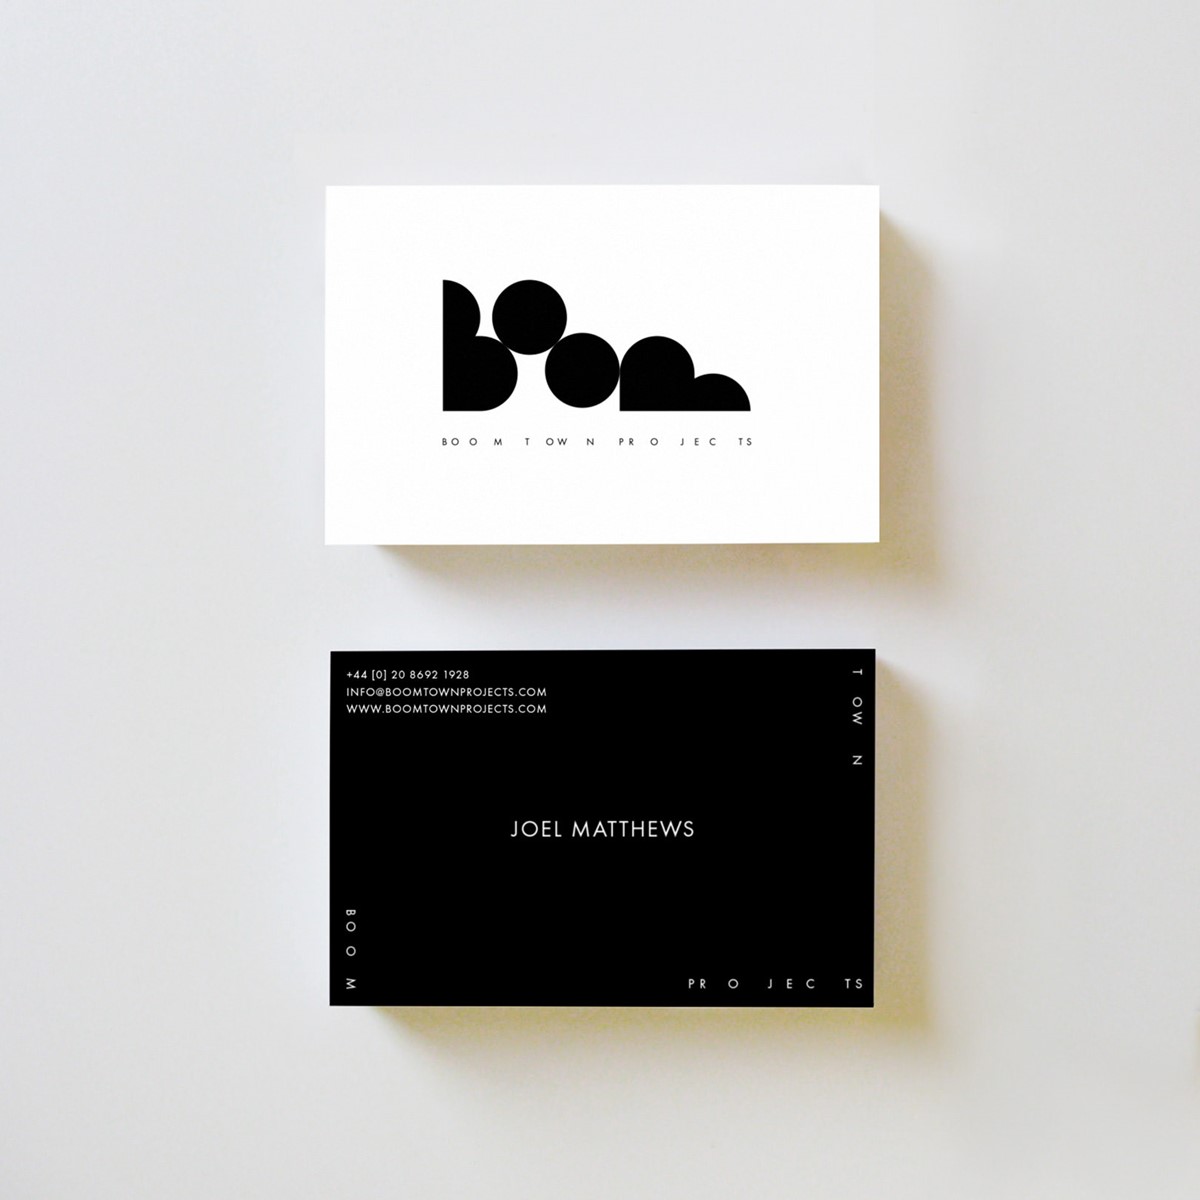 Boom Town Projects. Business cards mock up. Brand identity design by Superfried.